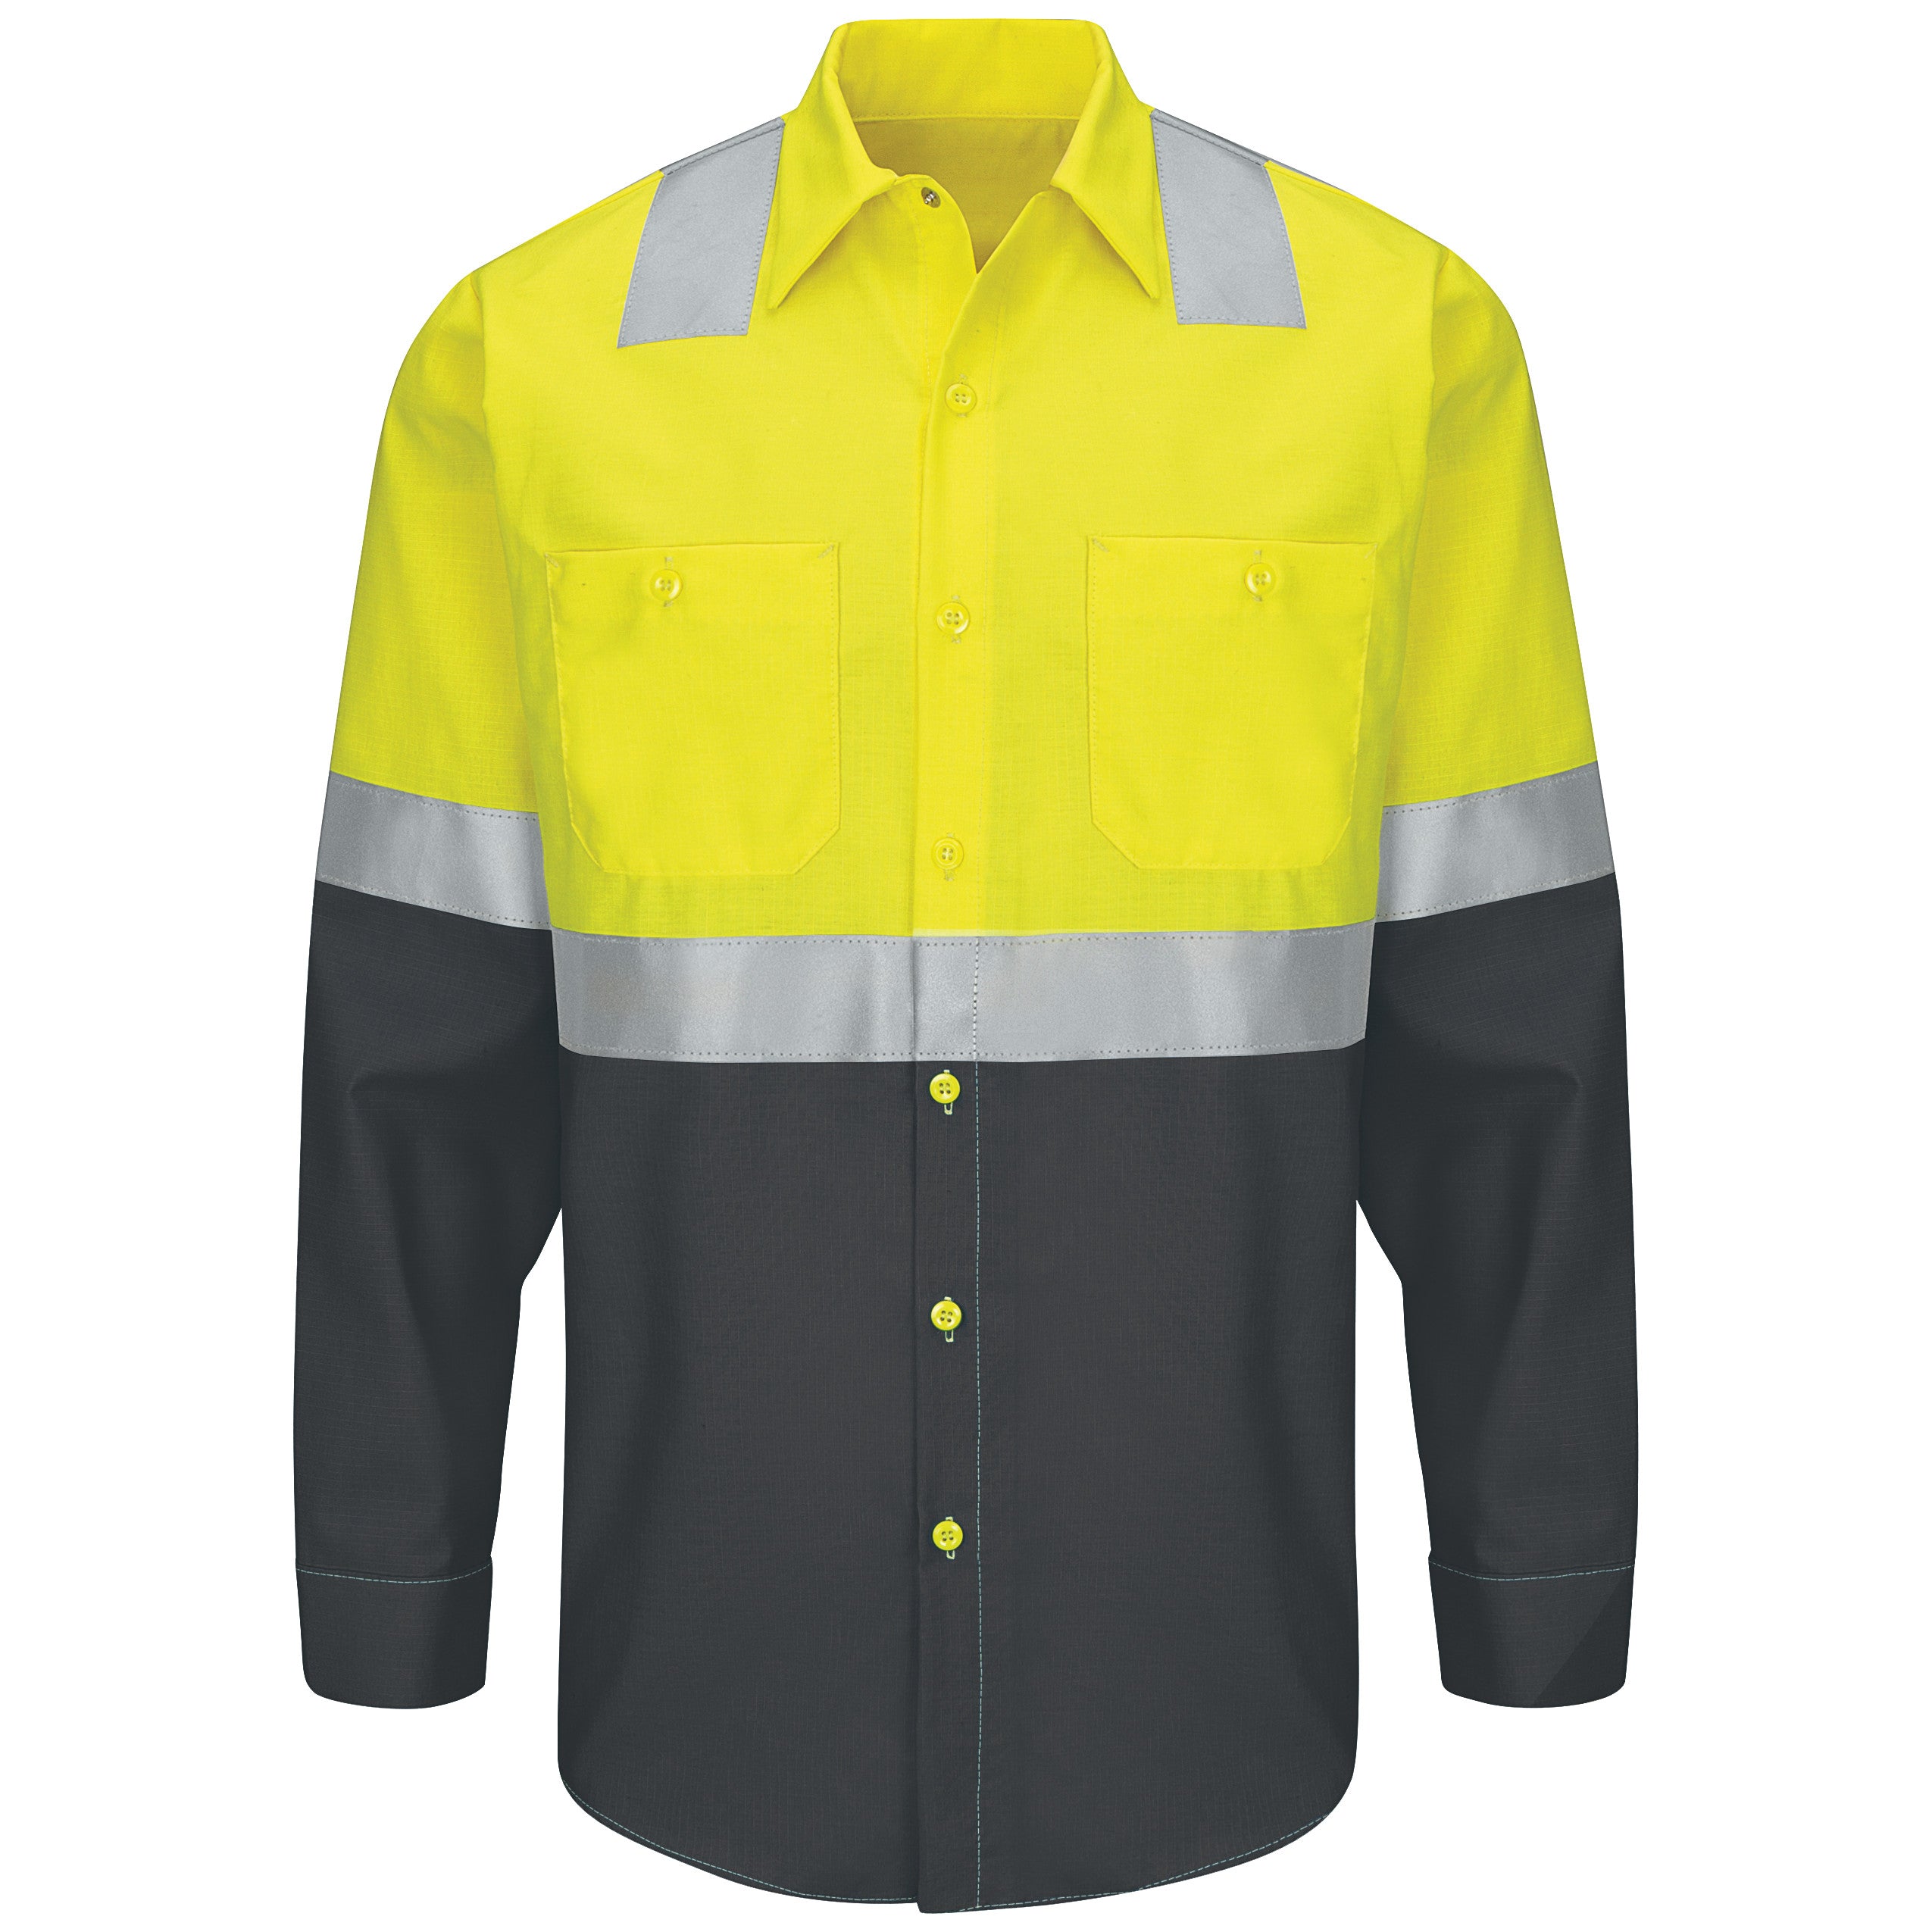 HI-VISIBILITY LONG SLEEVE COLORBLOCK RIPSTOP WORK SHIRT - TYPE R, CLASS 2 SY14 - Hi-Vis Yellow/Charcoal-eSafety Supplies, Inc